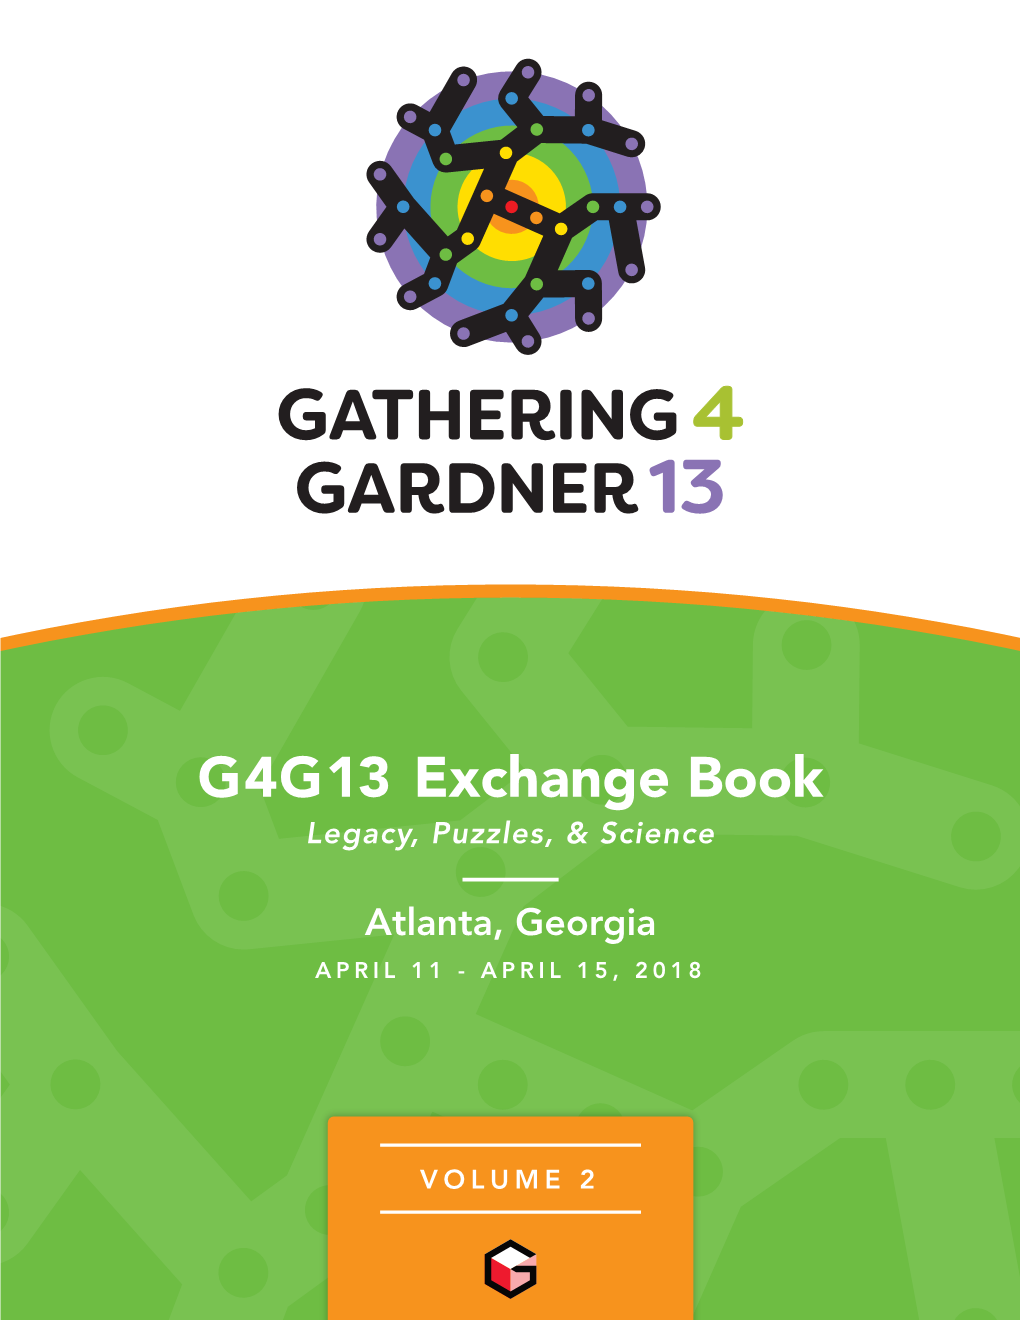 G4G13 Exchange Book Legacy, Puzzles, & Science